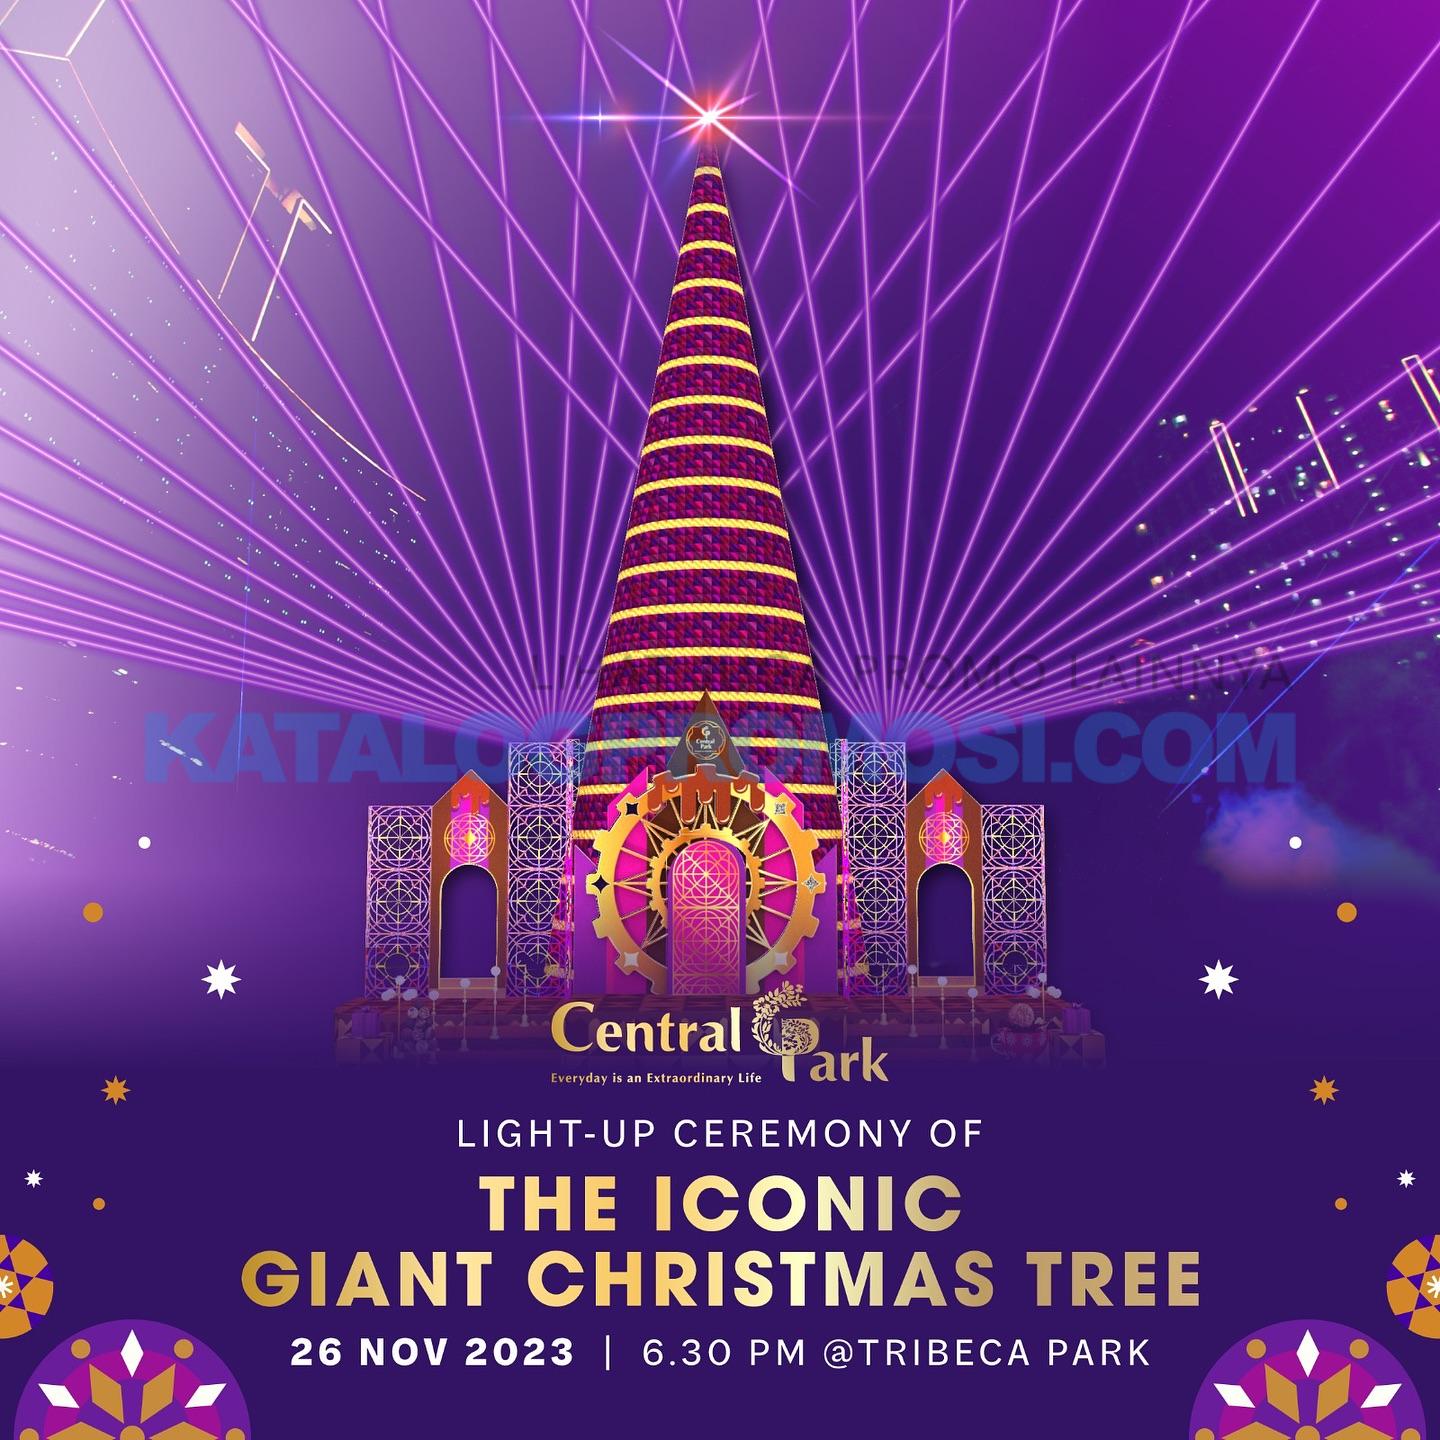 CENTRAL PARK MALL Noel Season’s Light-Up Ceremony of the Iconic Giant Christmas Tree